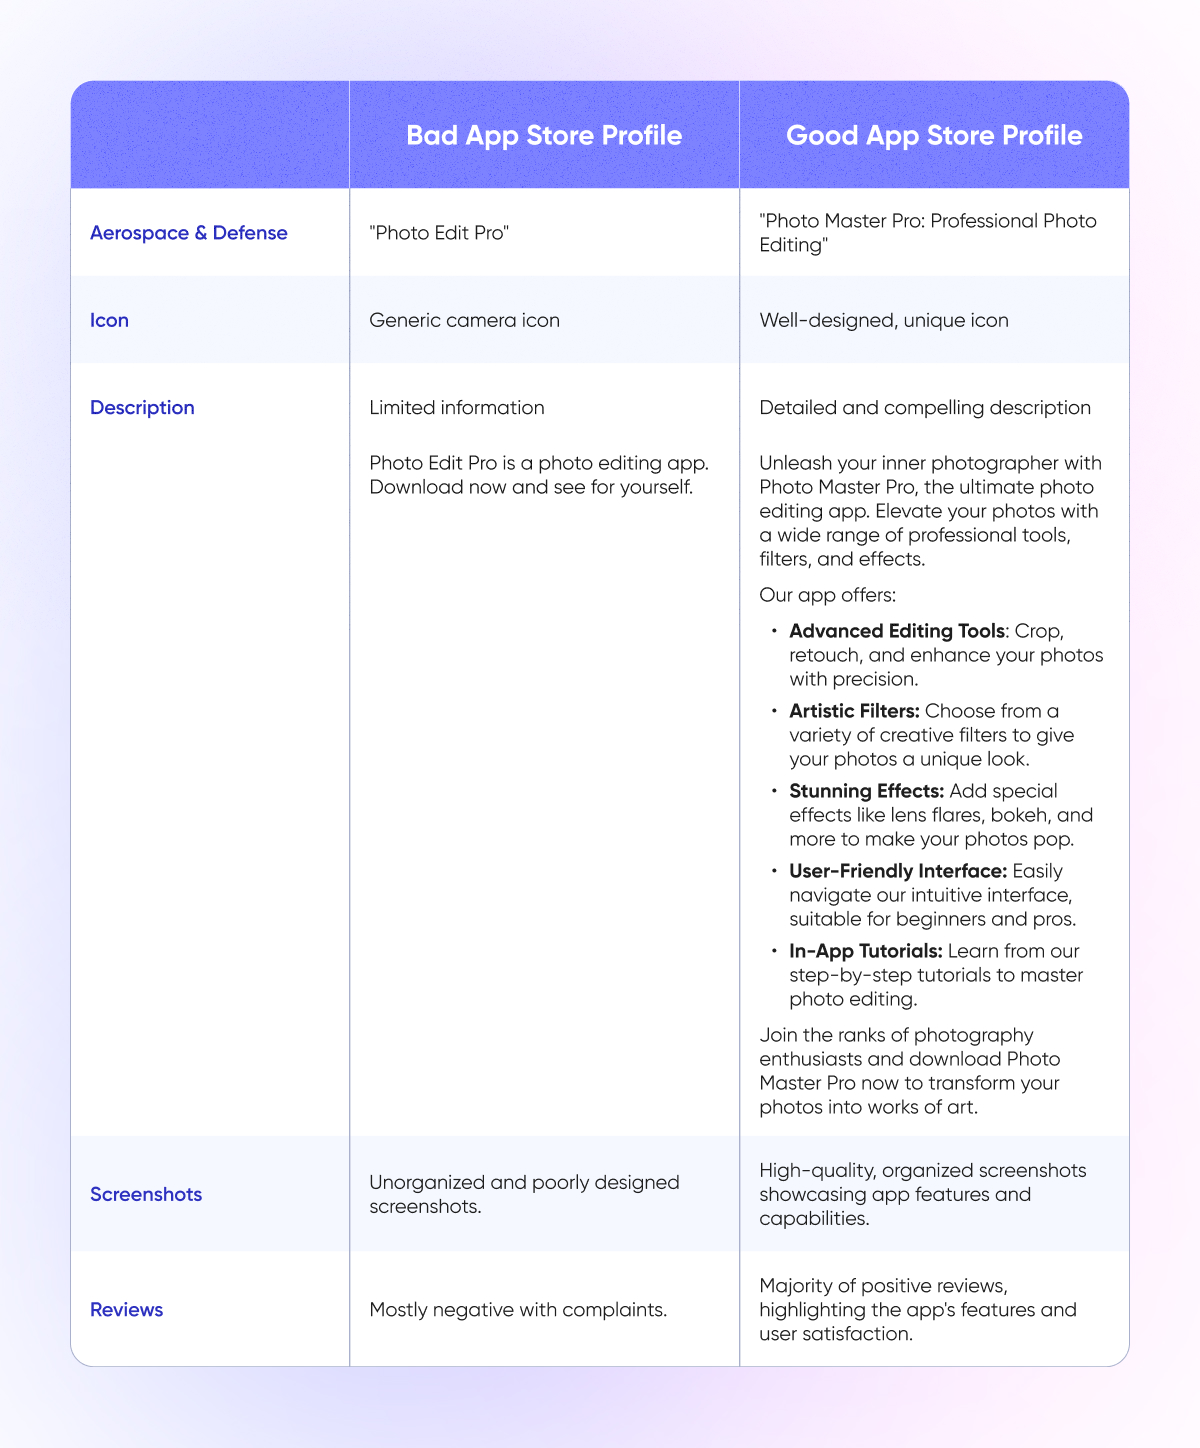 Comparison Table of Good and Bad App Store Profiles